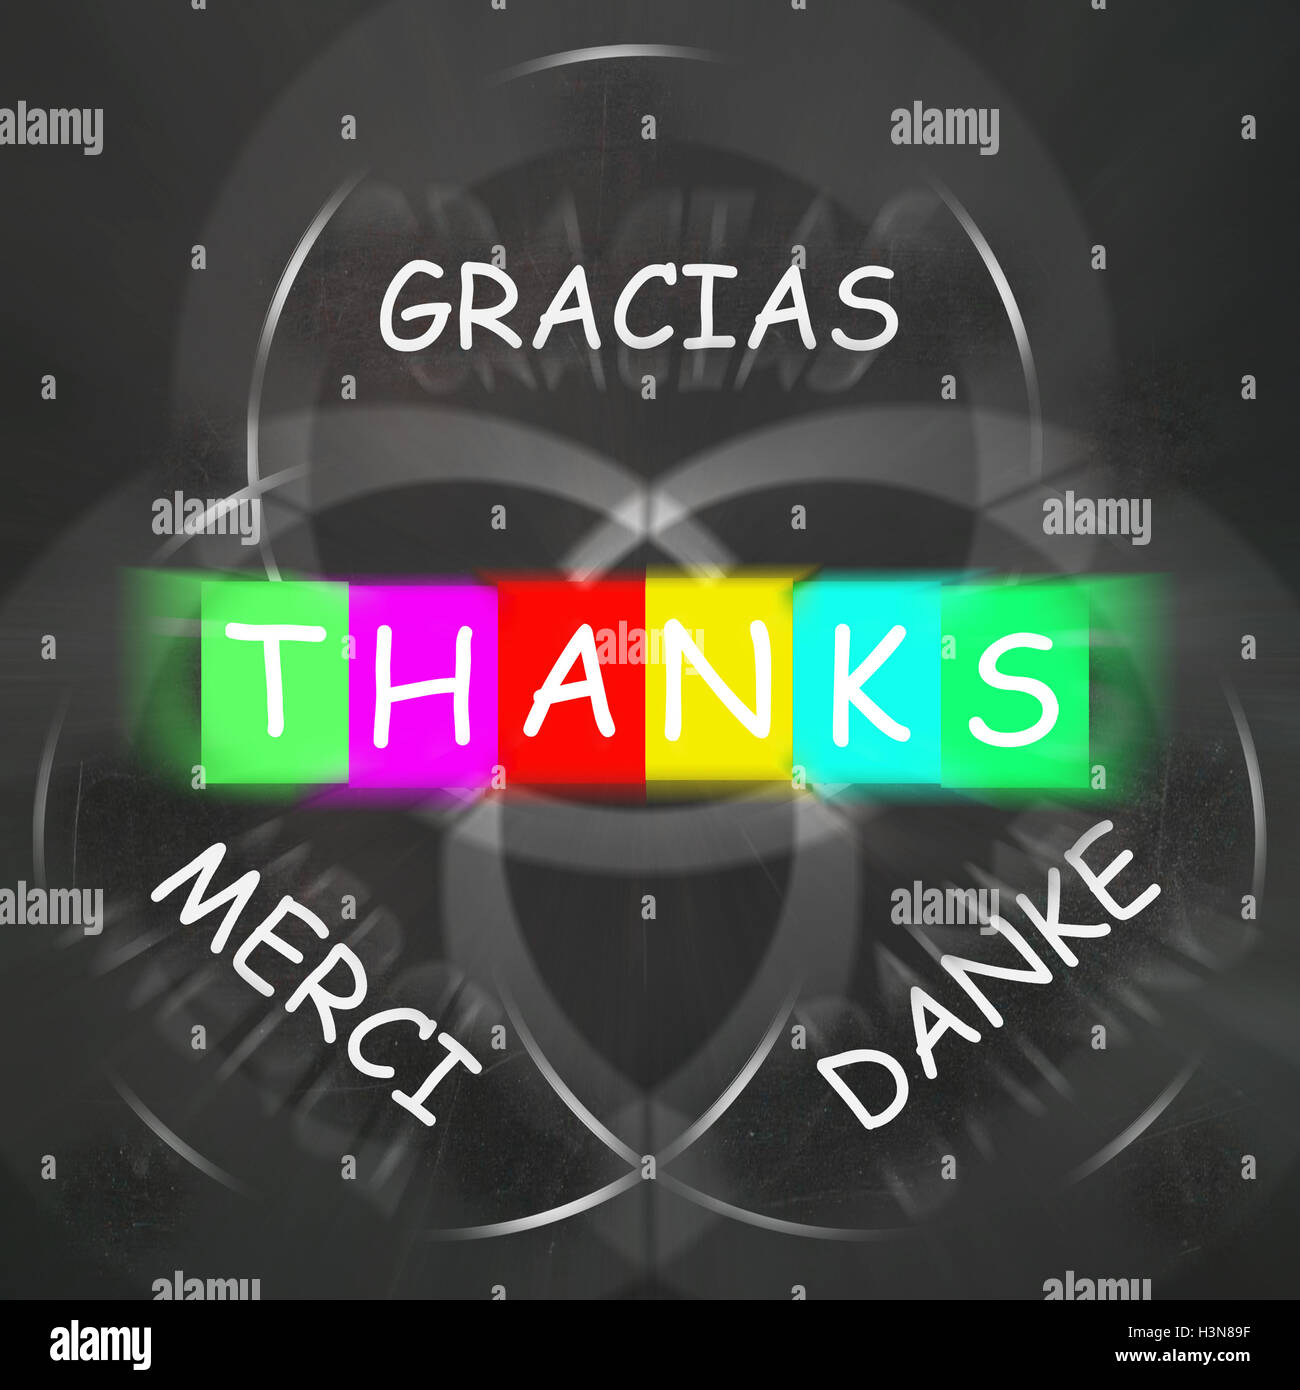 Gracias Merci and Danke Displays Thanks in Foreign Languages Stock Photo